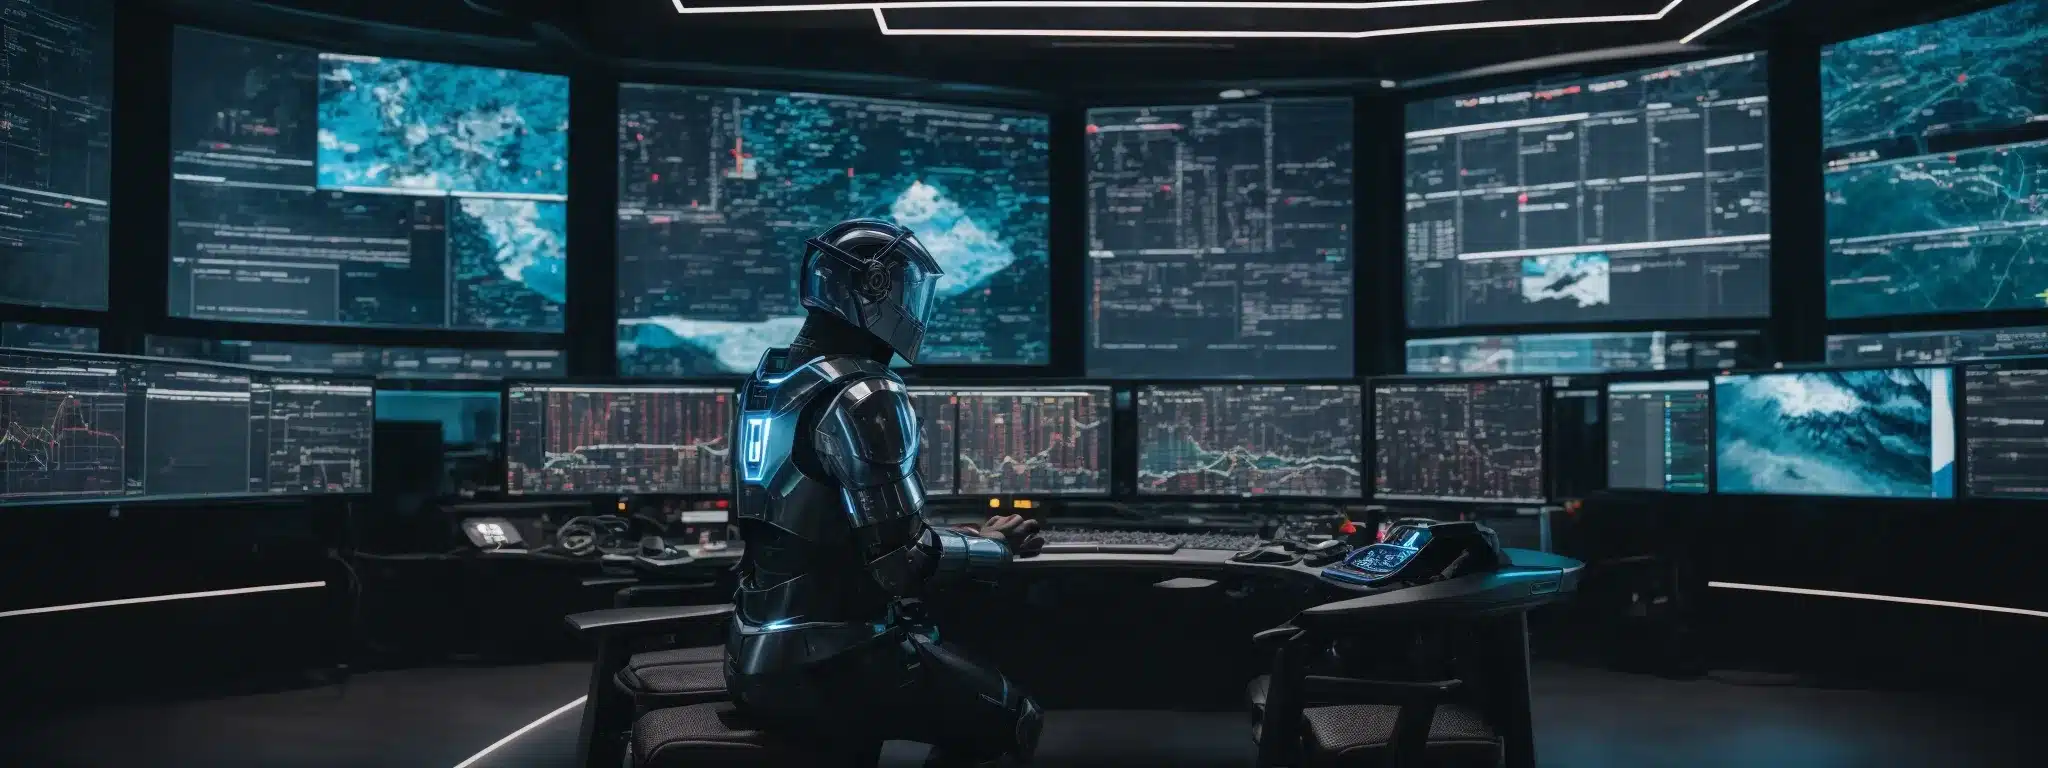 A Knight In Modern Digital Armor, Surrounded By Screens Displaying Data And Futuristic Graphs, Readies For Battle In A High-Tech Command Center.